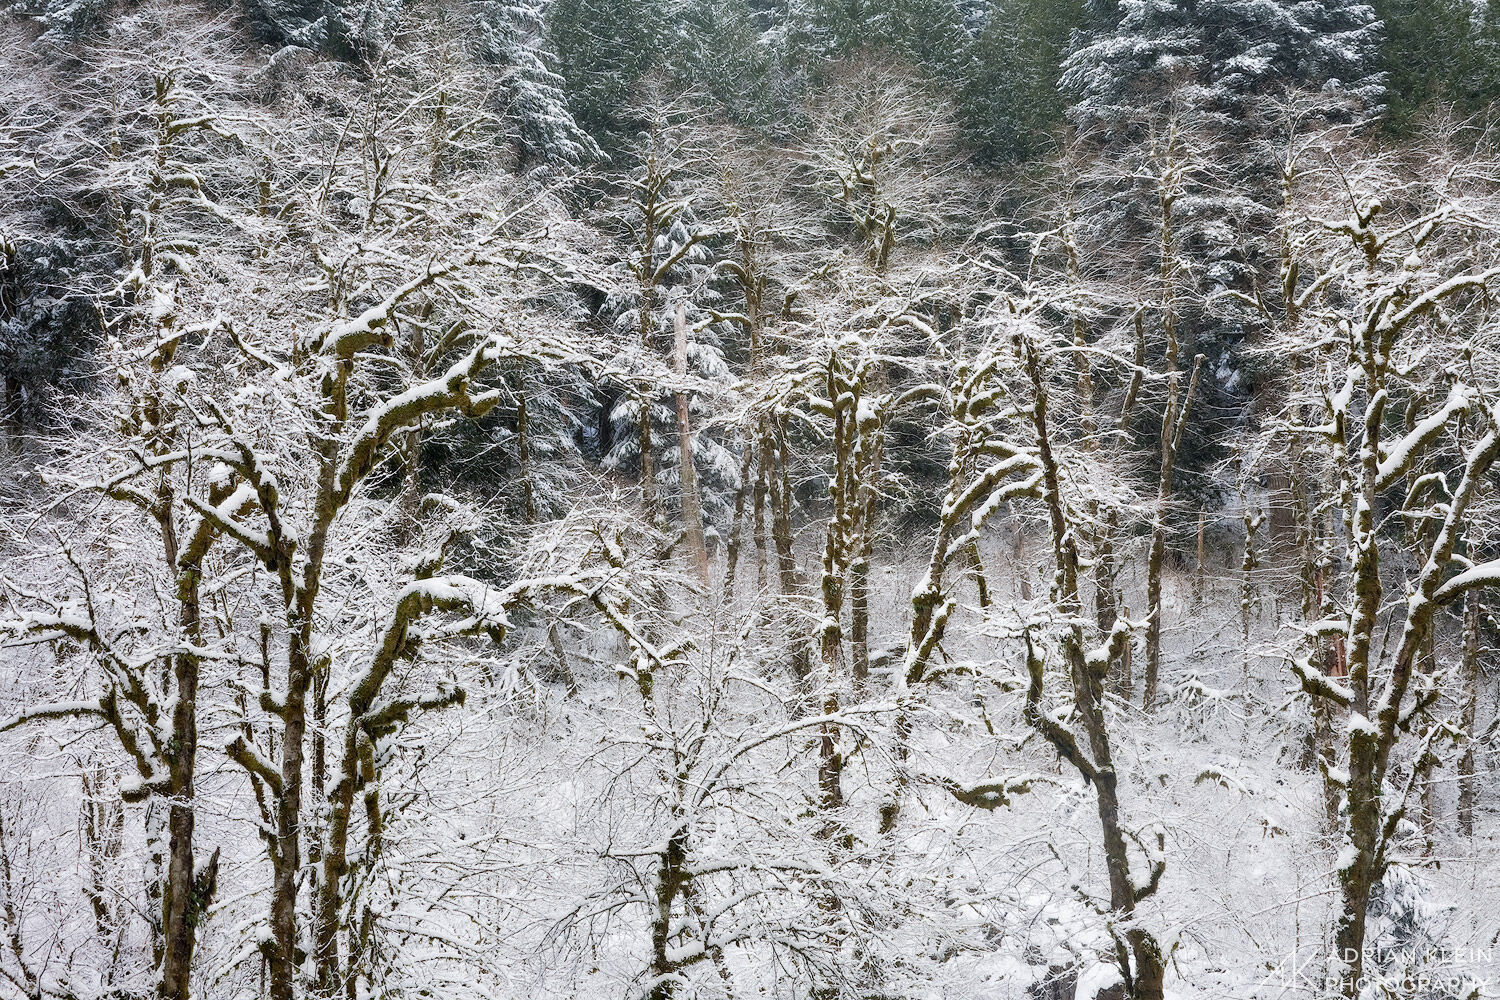 Dusting of snow blankets bare winter trees in the Columbia Gorge on a cold December morning. I have not been back to view this...